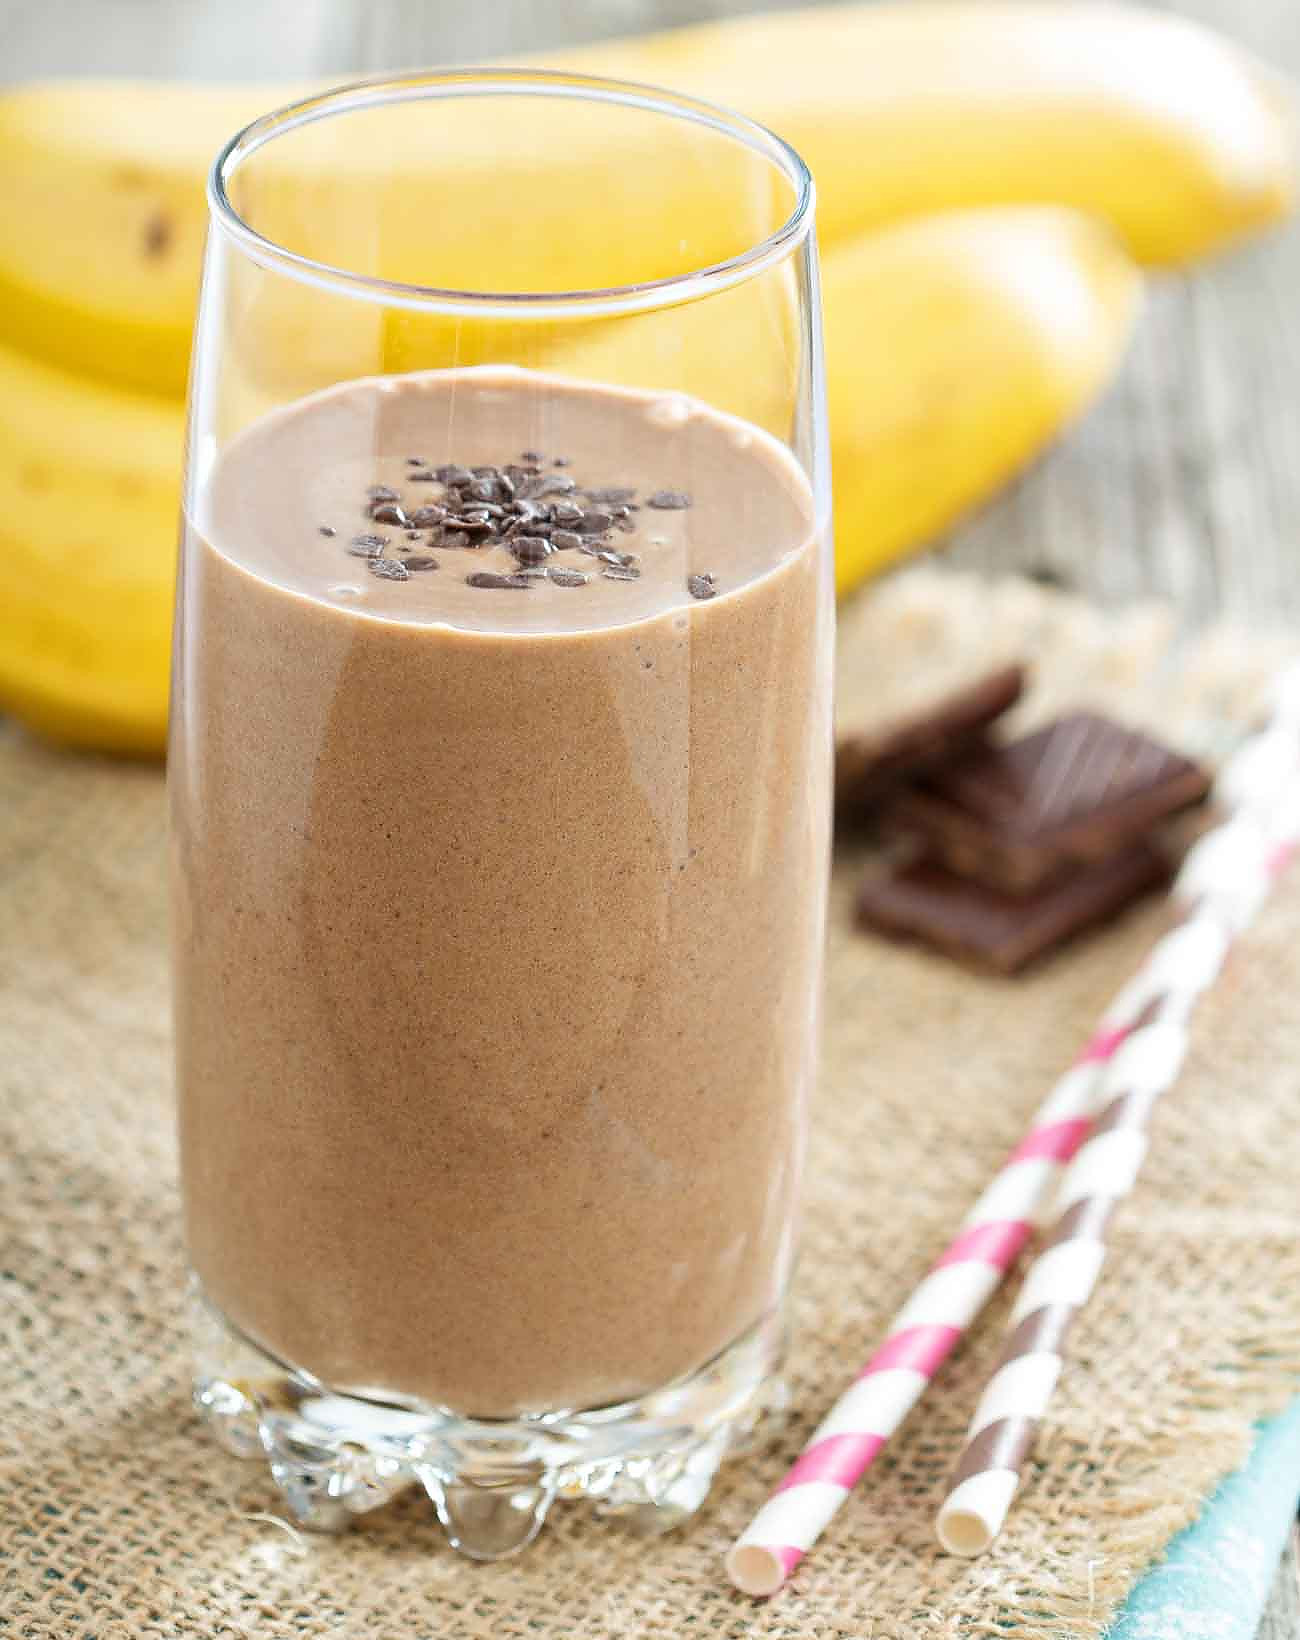 Chickoo Banana Date Smoothie Recipe